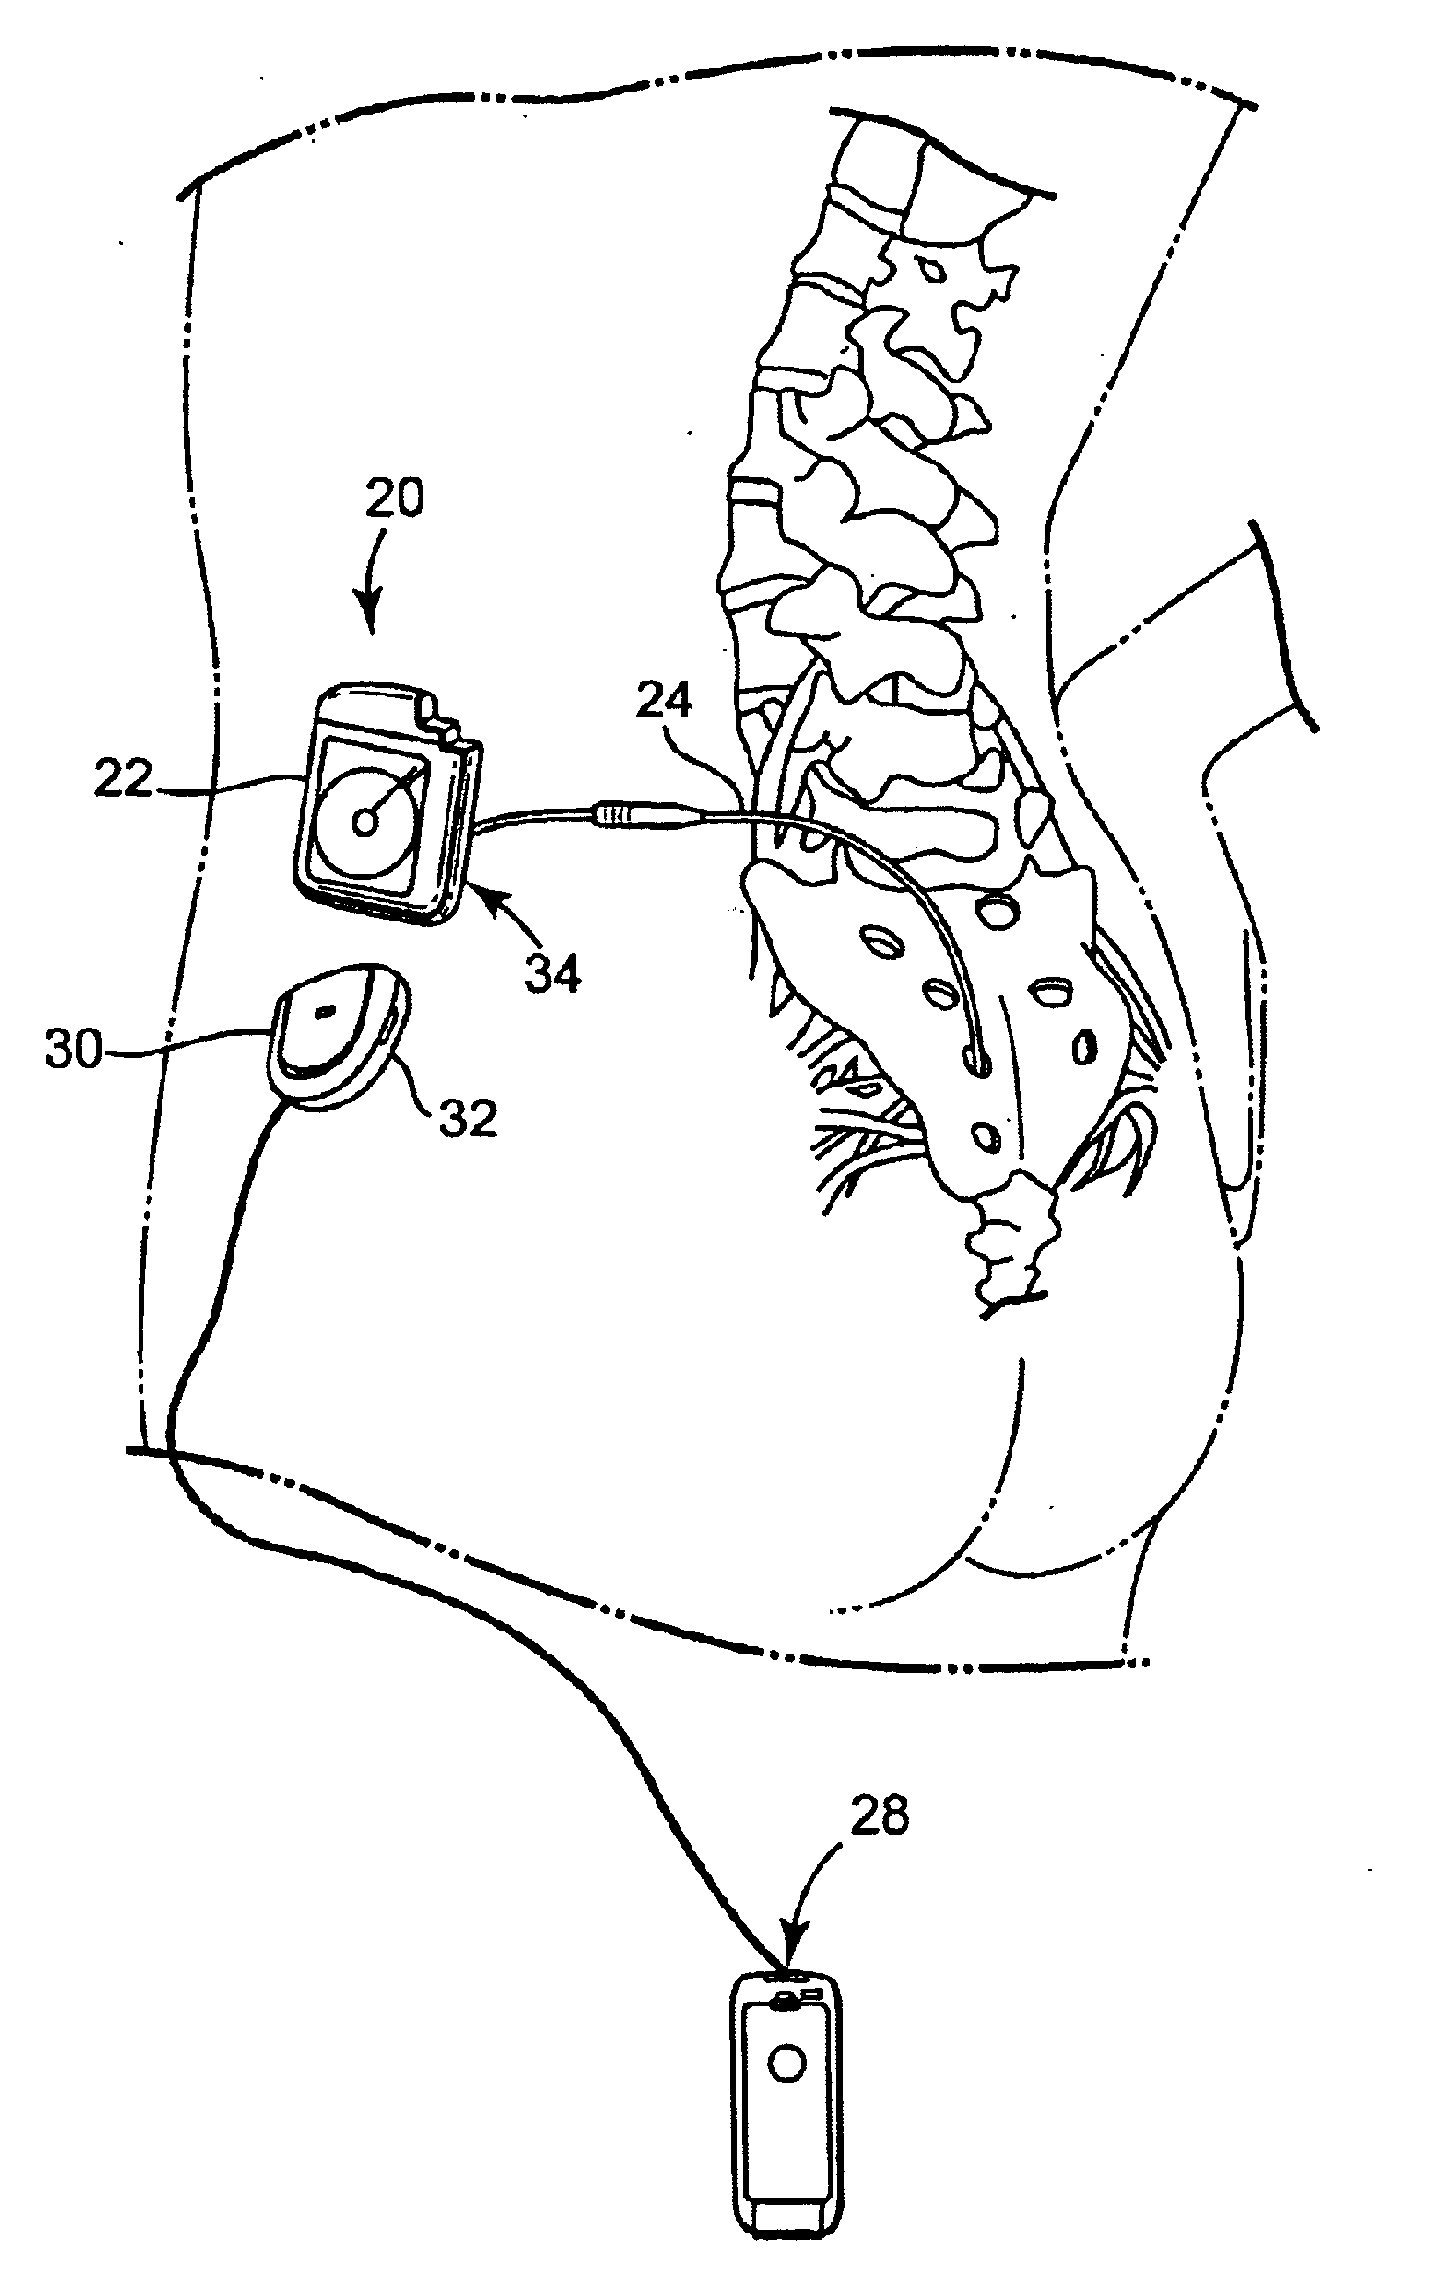 Accessory apparatus for improved recharging of implantable medical device